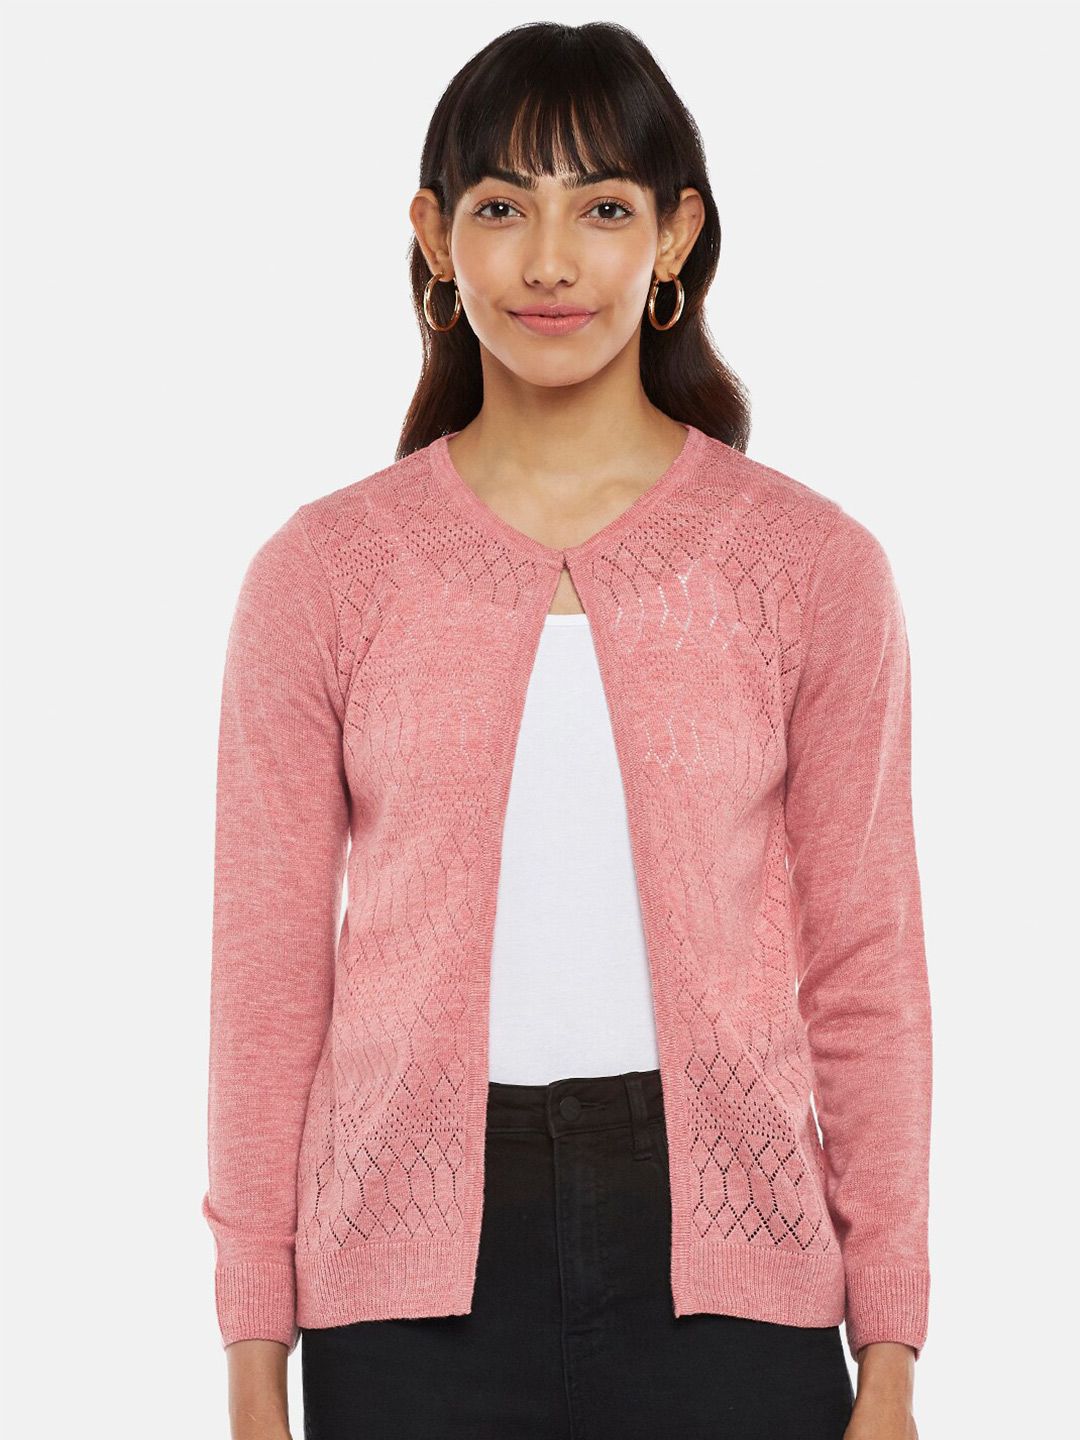 Honey by Pantaloons Women Pink V-Neck Front Open Sweaters Price in India